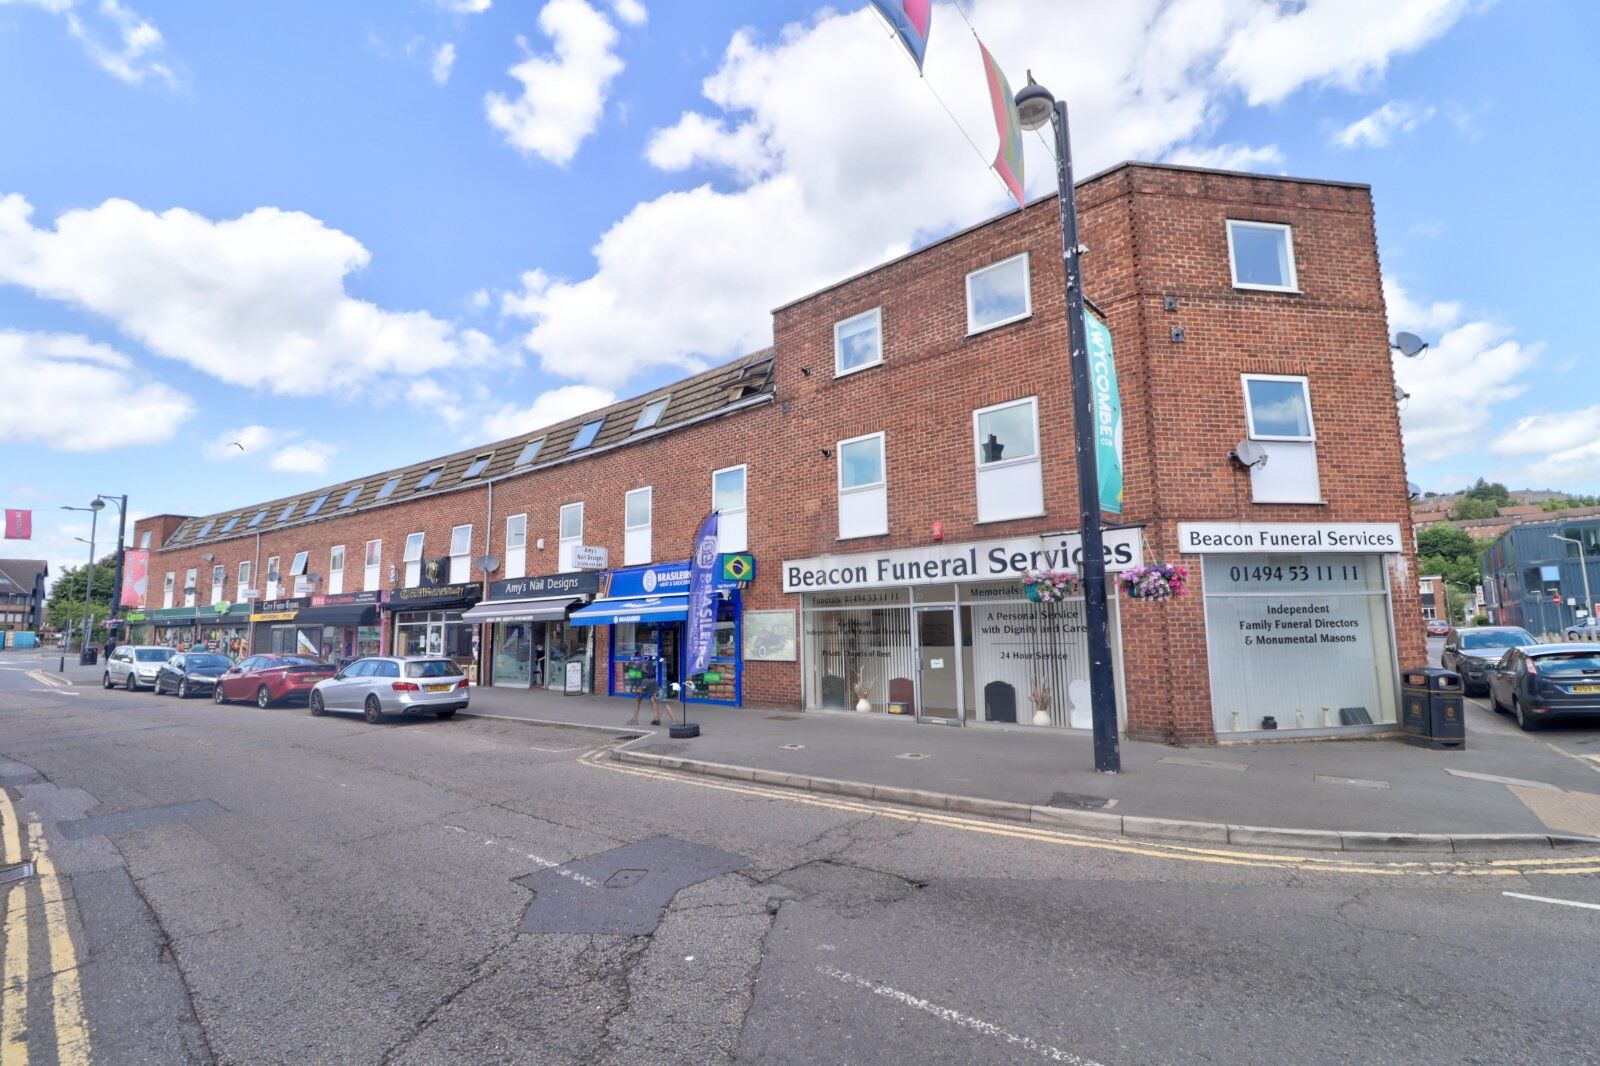 1 bedroom  flat to rent, Available now Desborough Road, High Wycombe, HP11, main image